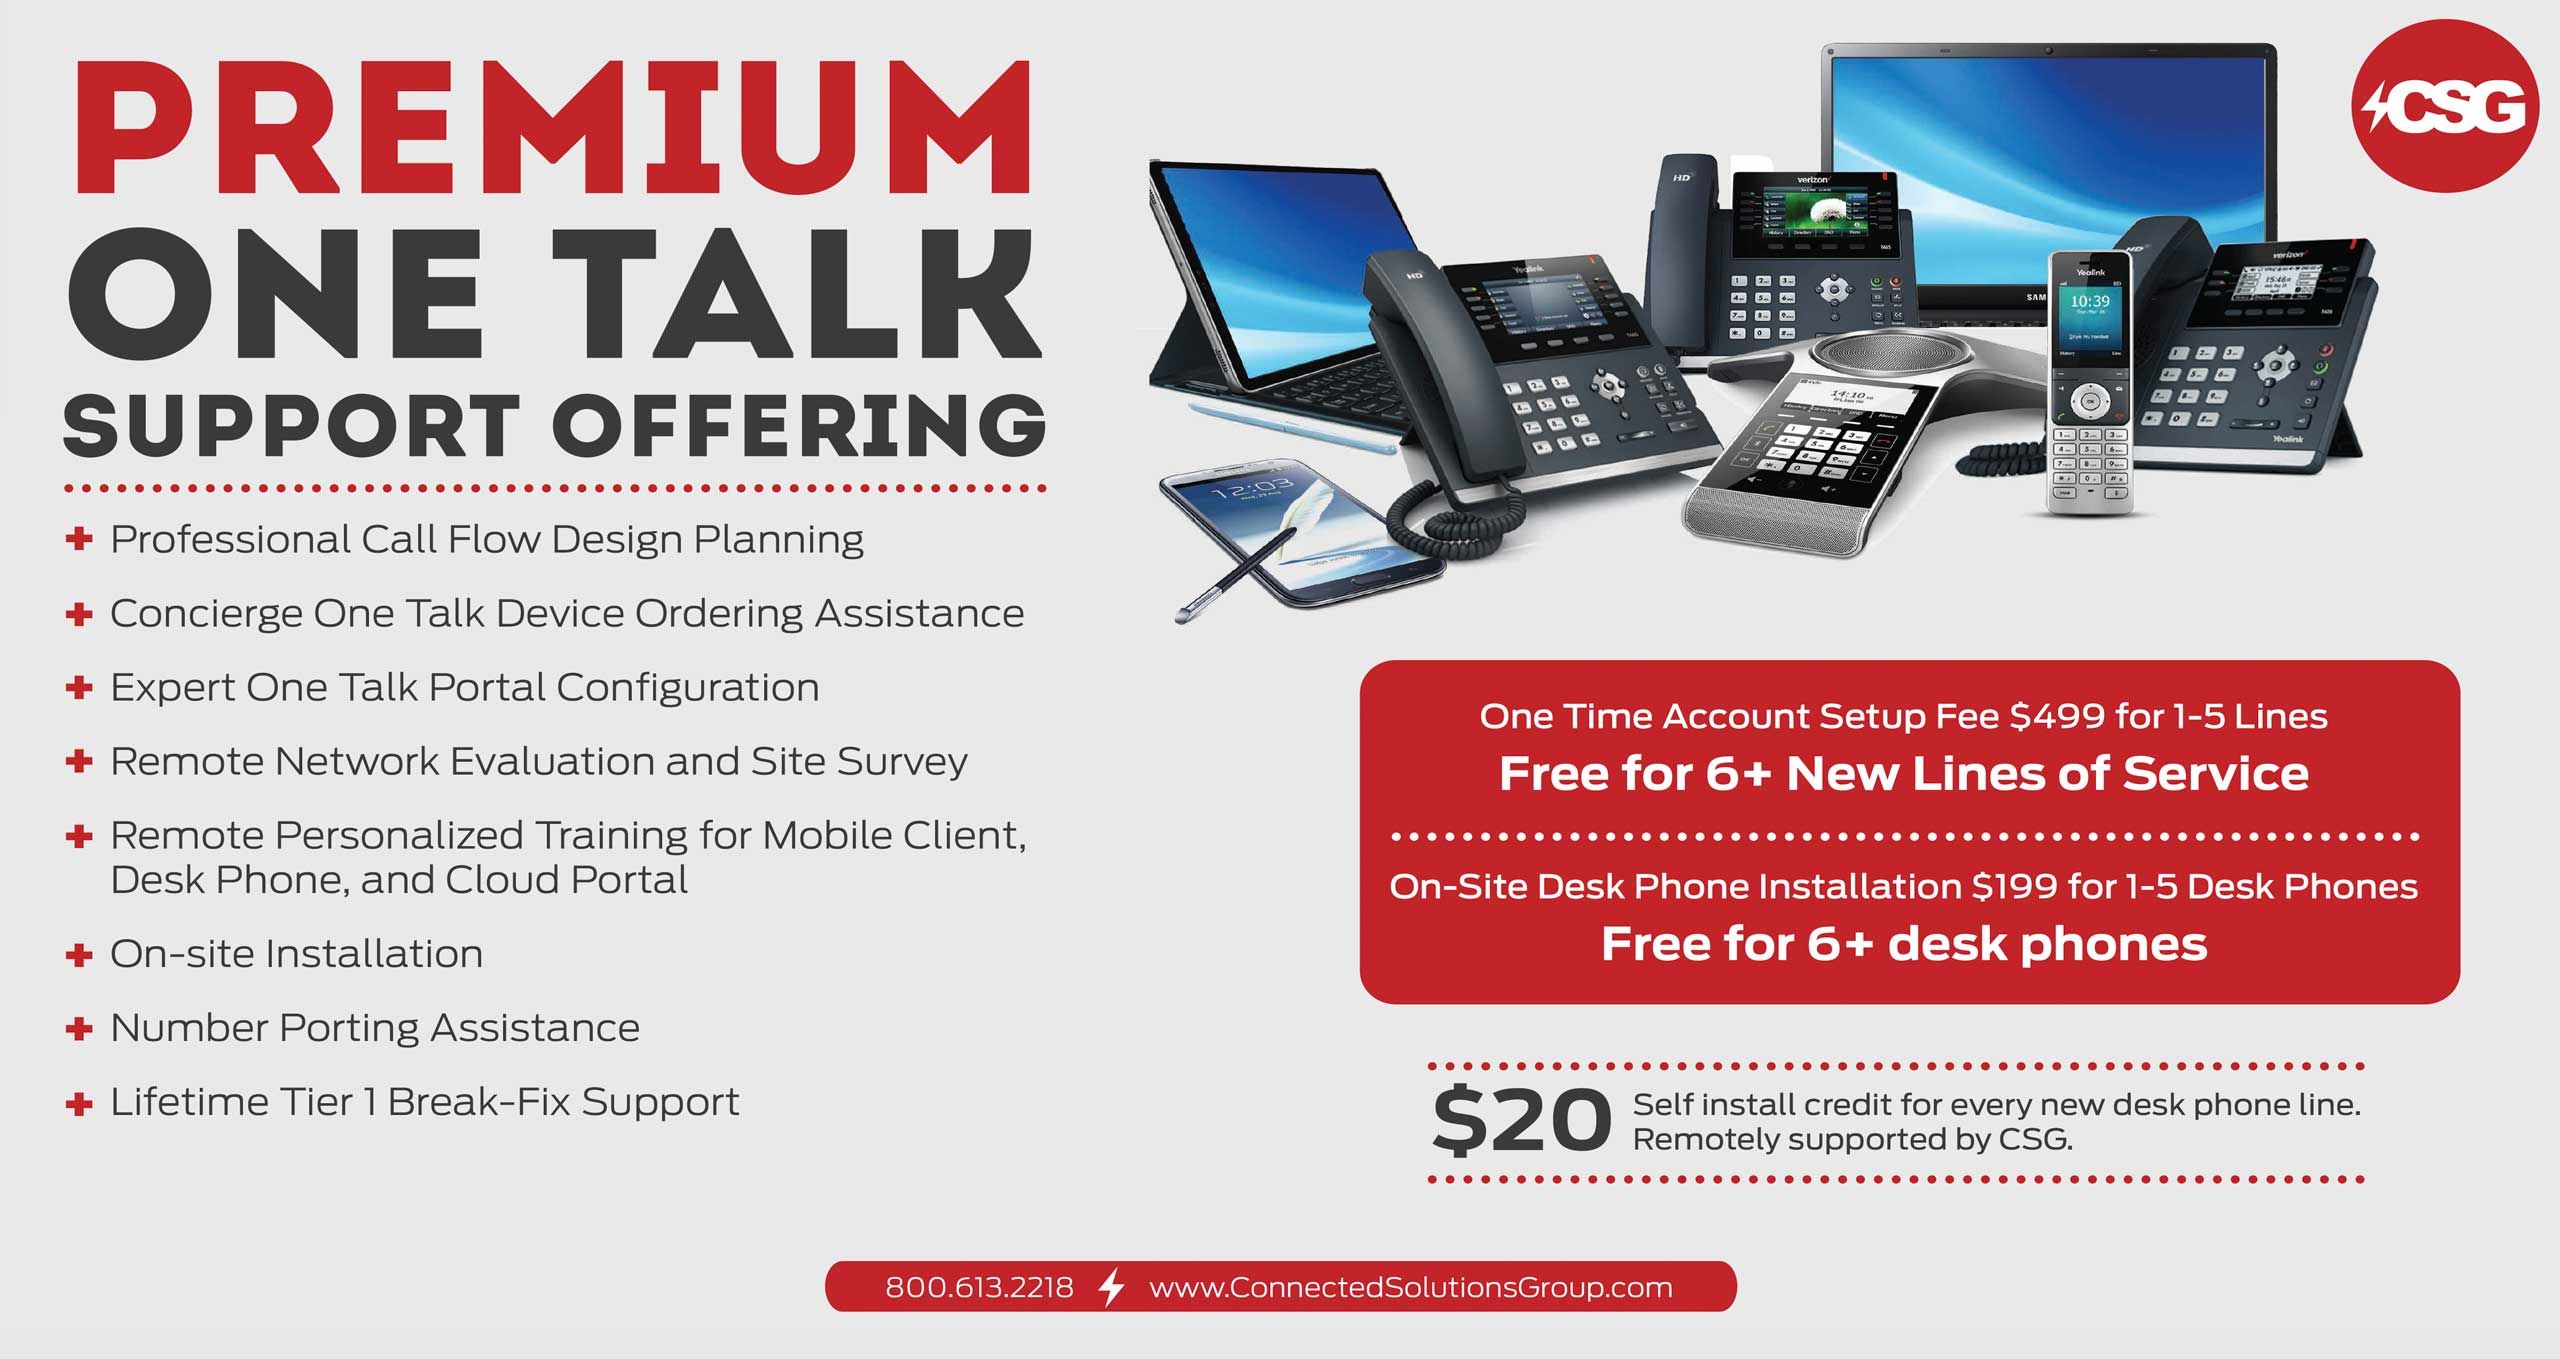 CSG IS PROUD TO SUPPORT VERIZON’S REVOLUTIONARY ONE TALK VOIP PLATFORM.